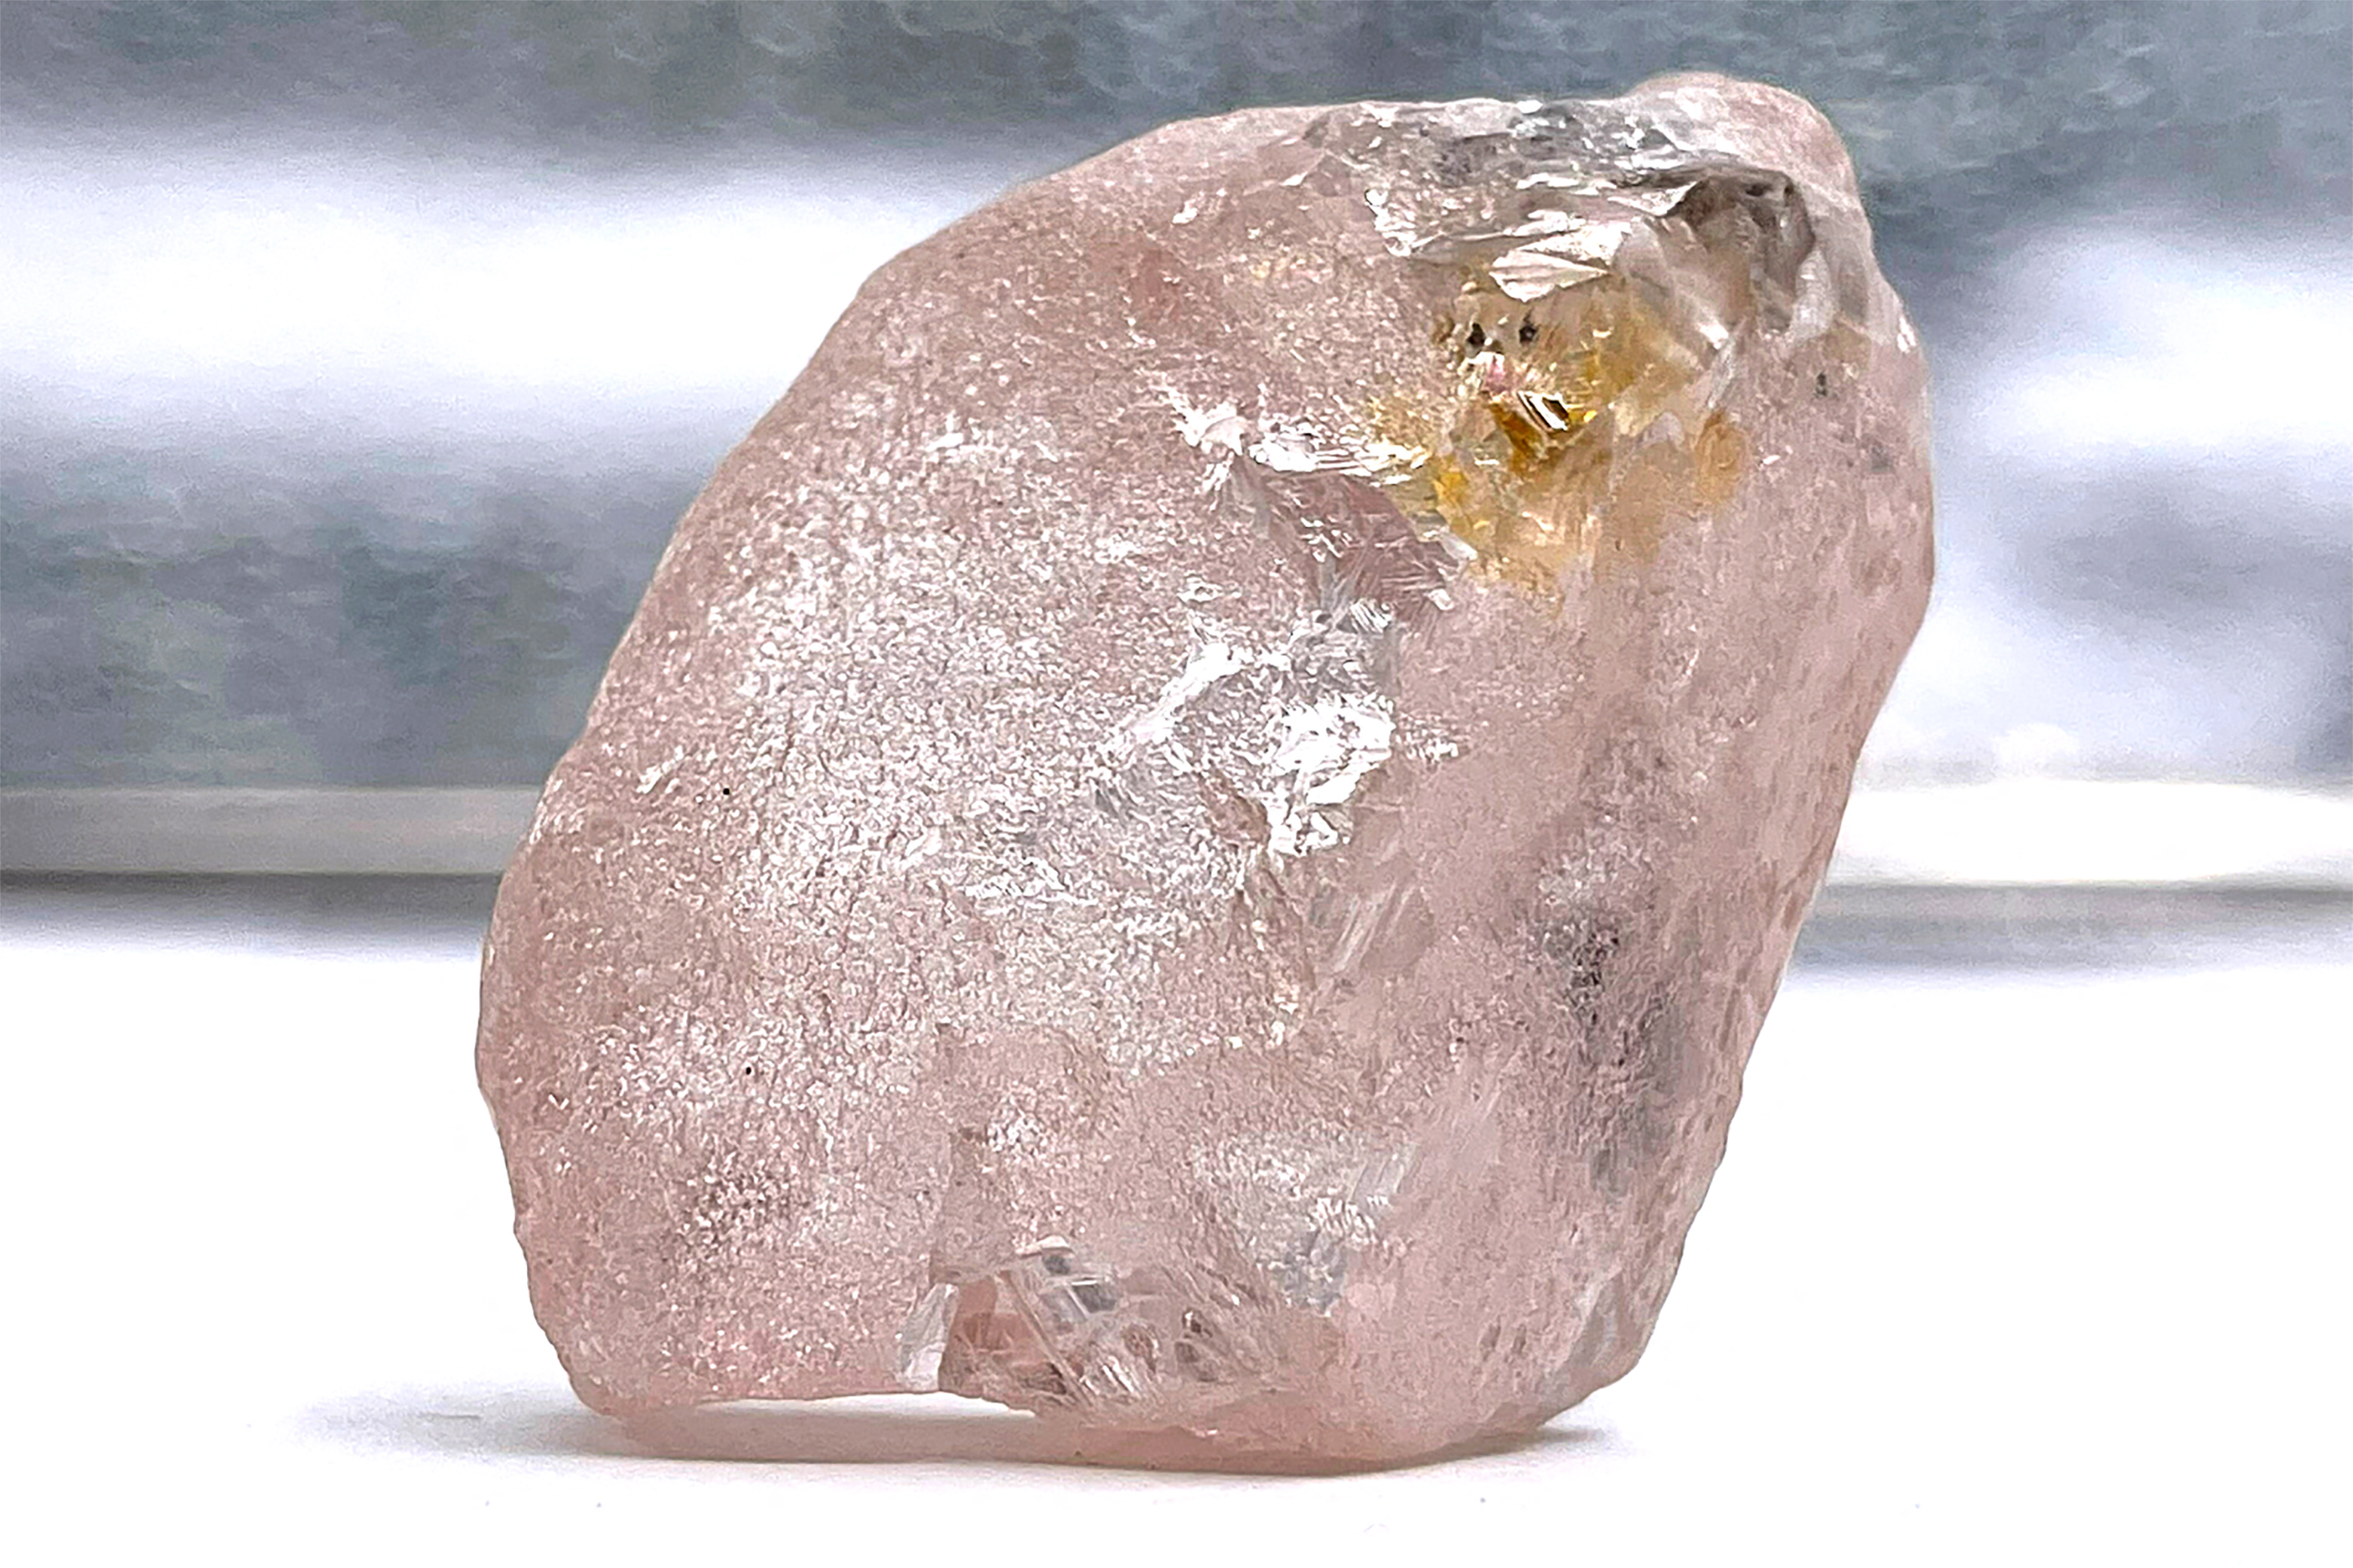 A large uncut, pink diamond sits on a table